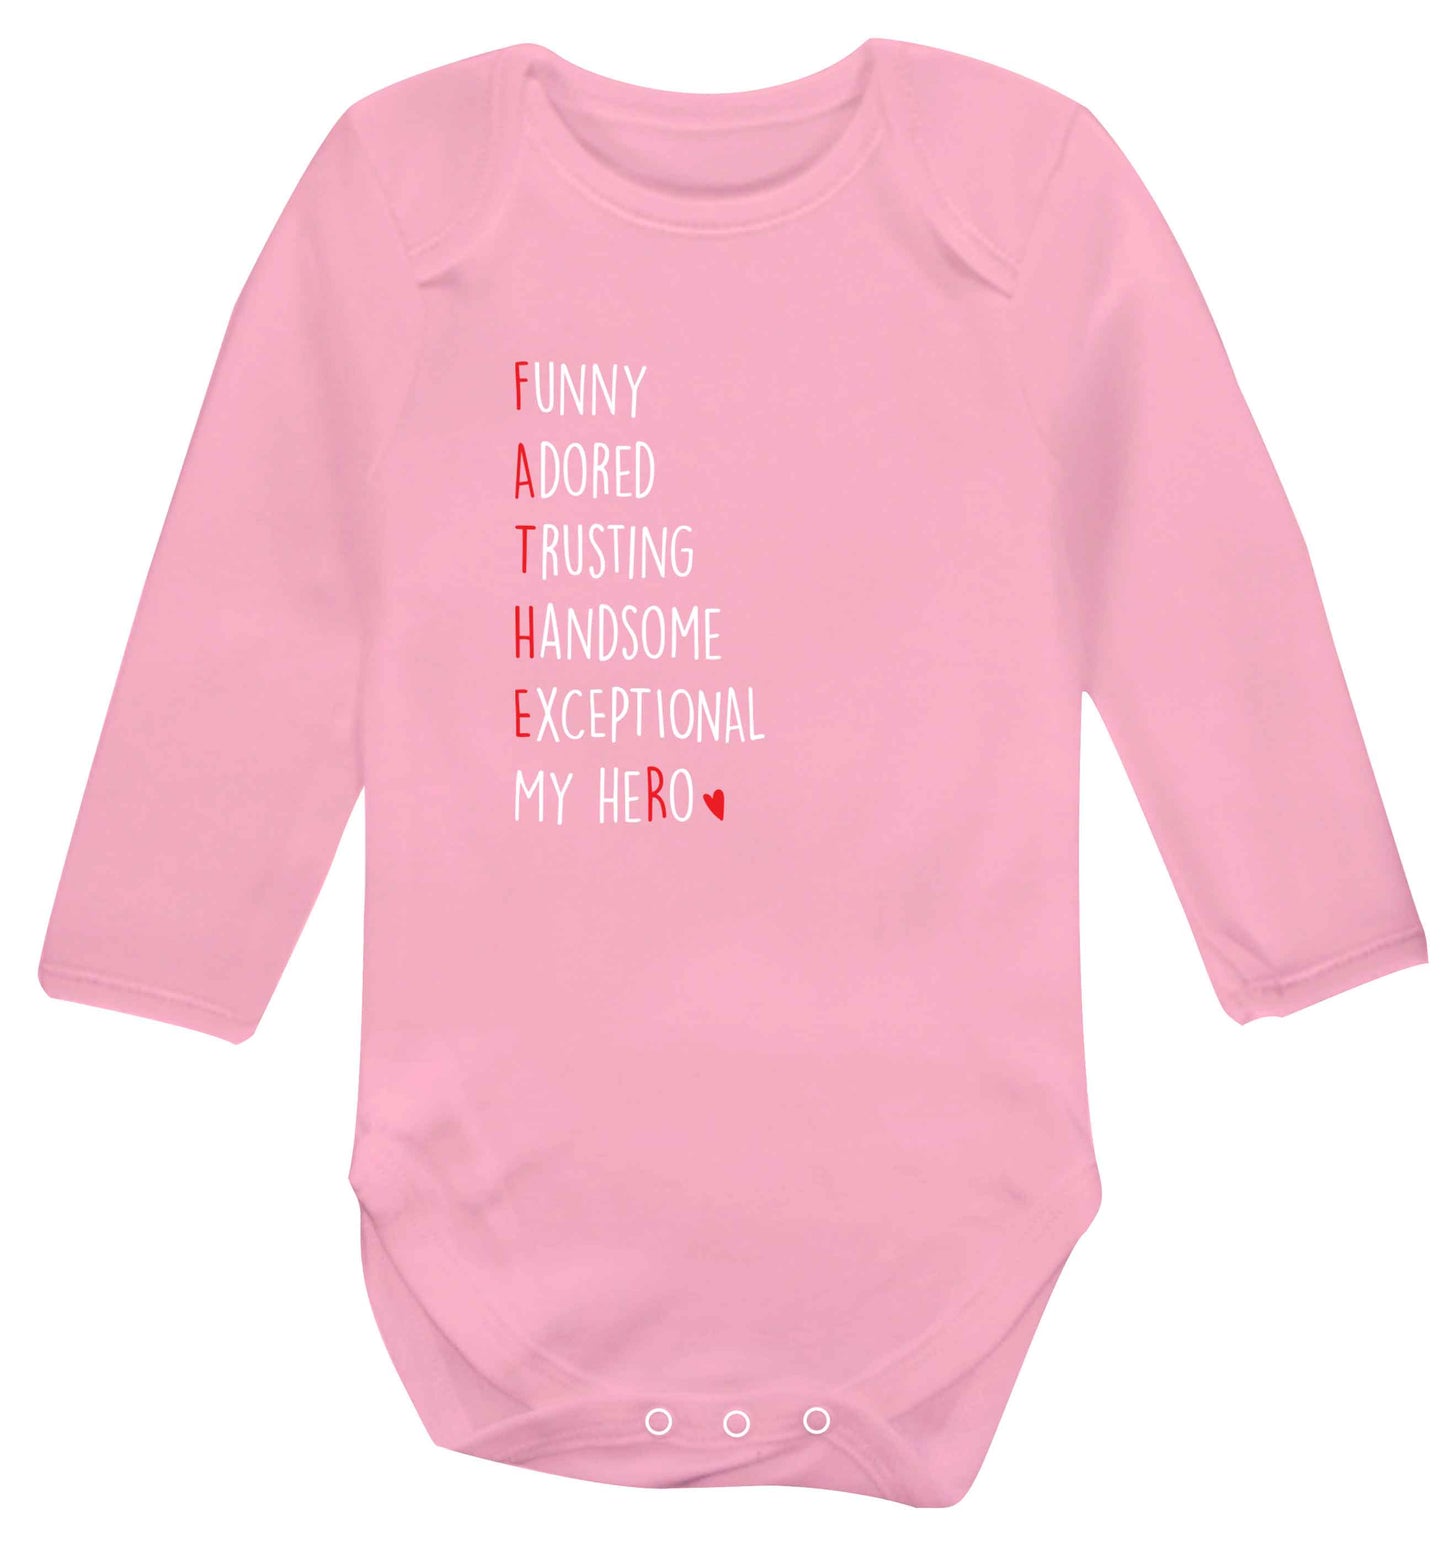 Father meaning hero acrostic poem baby vest long sleeved pale pink 6-12 months